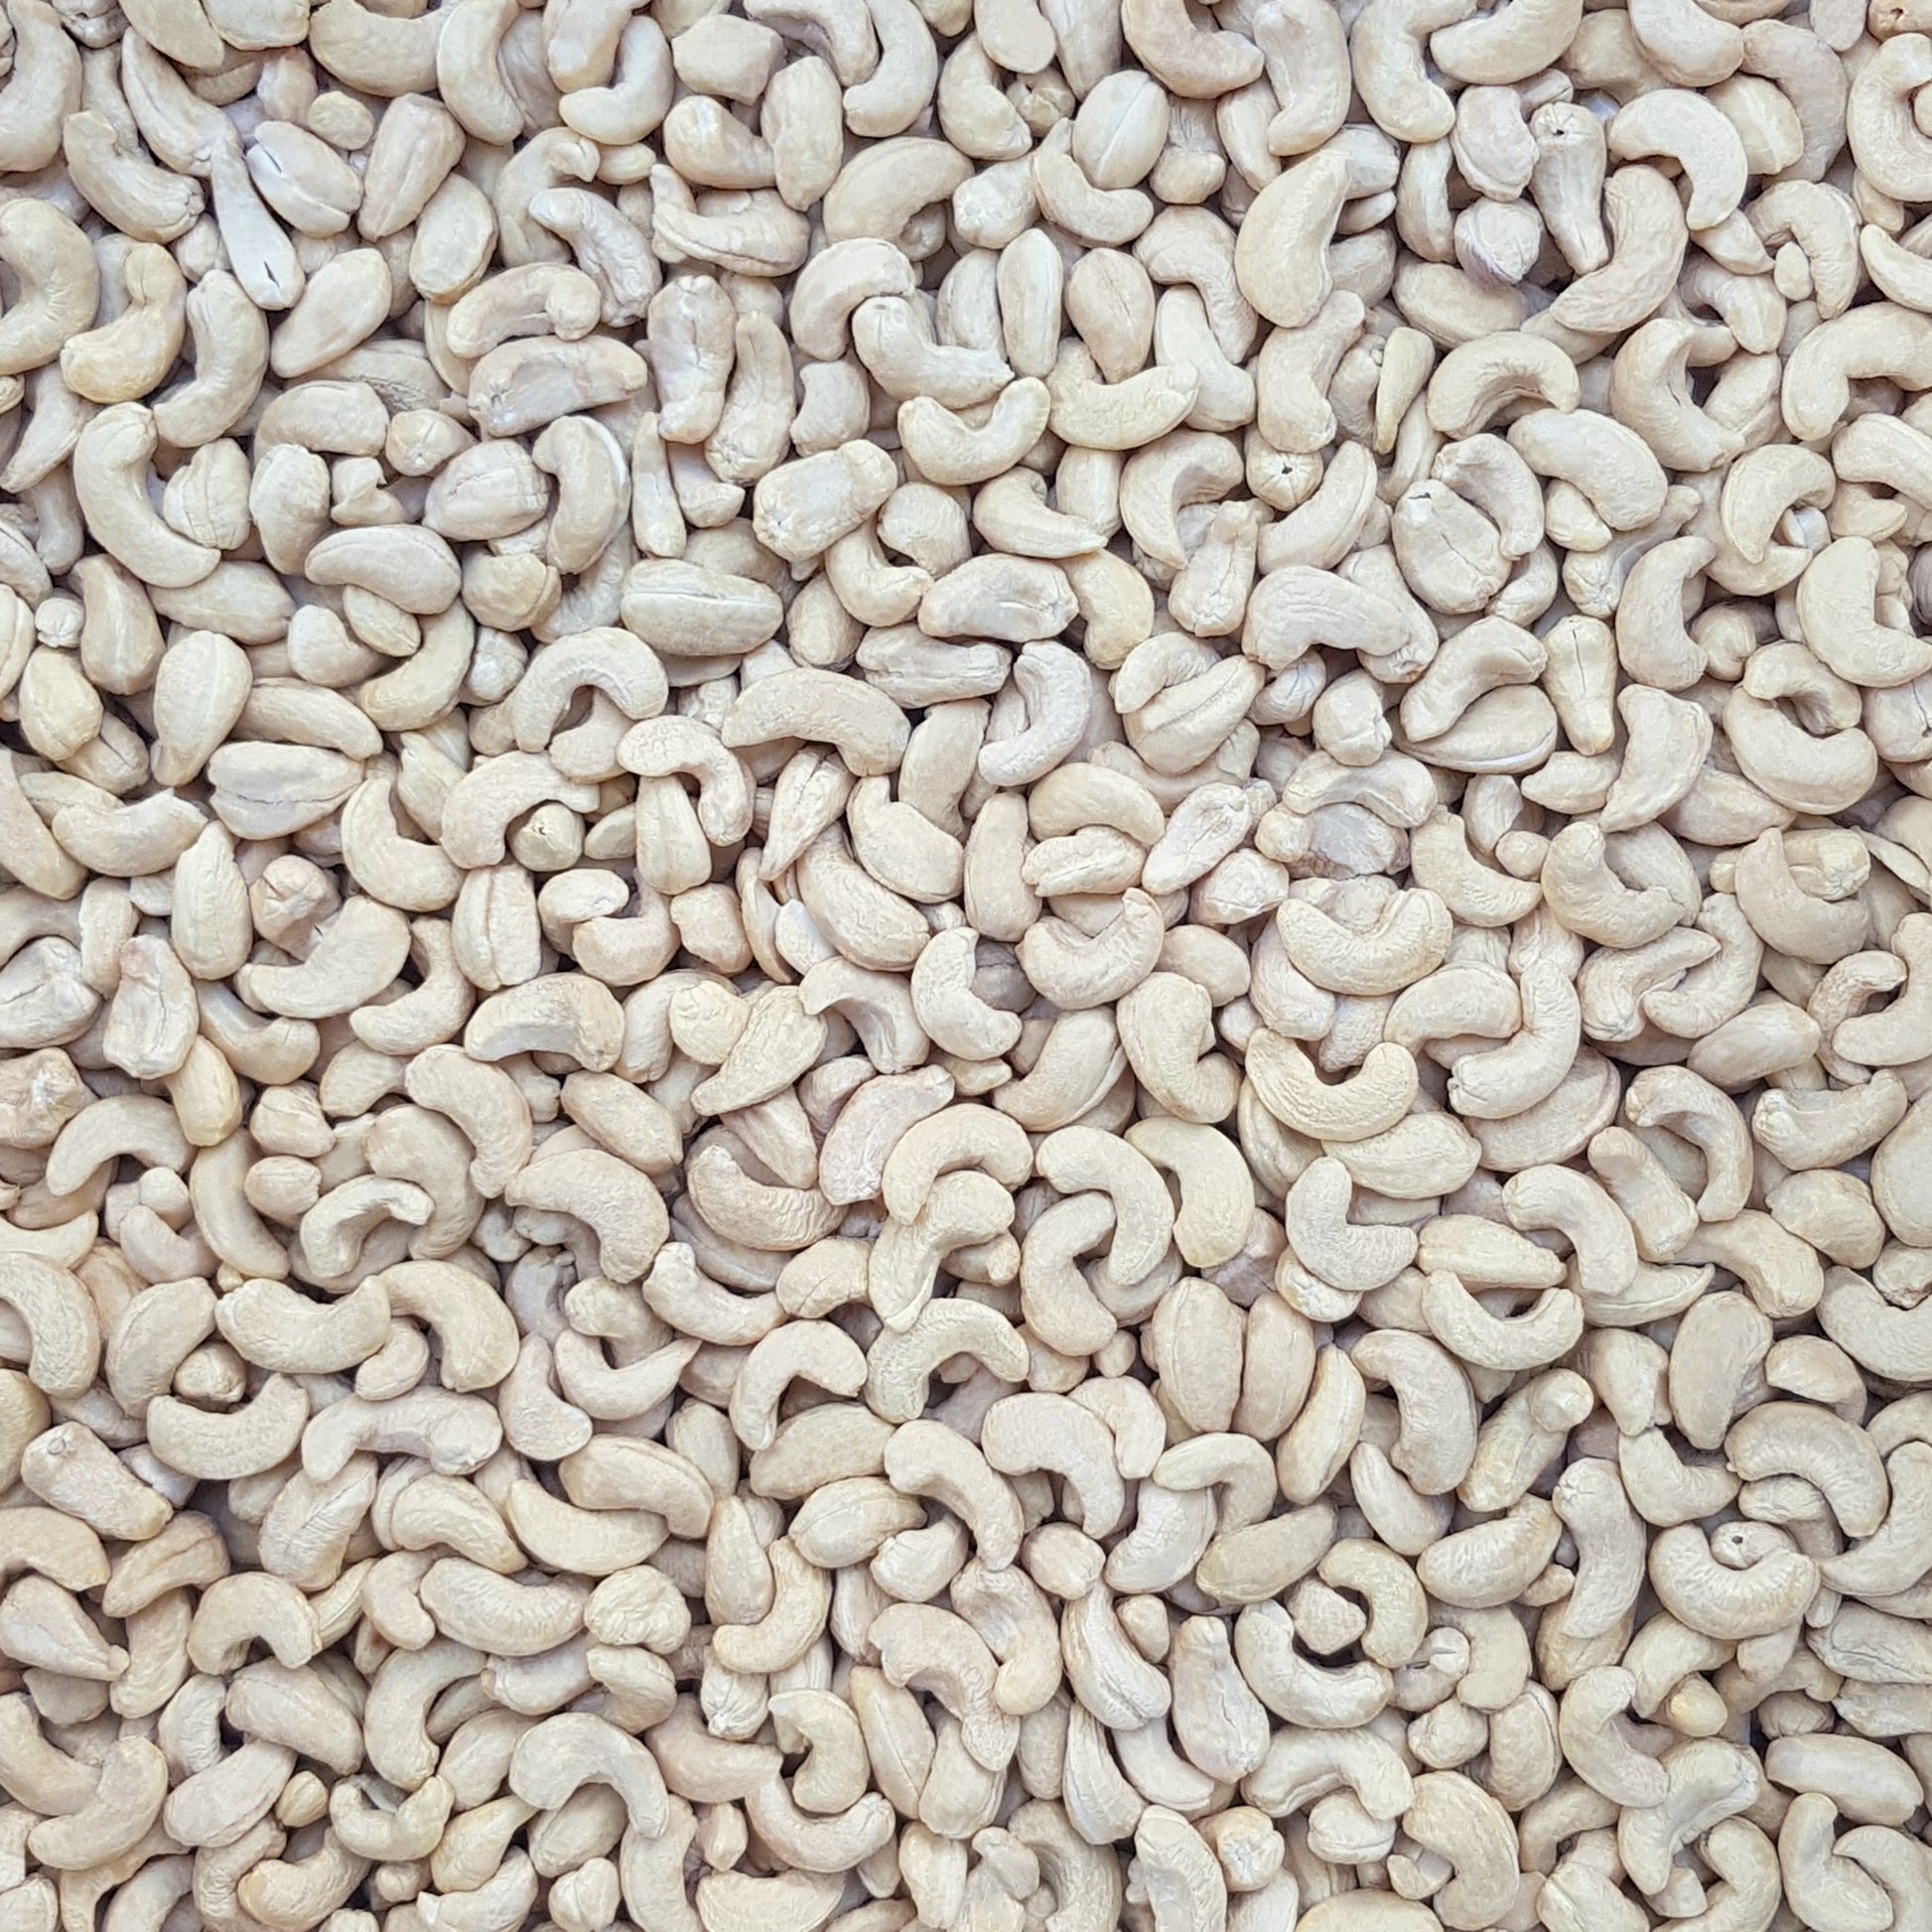 Full frame overhead image of BY NATURE Cashew Nuts - raw.